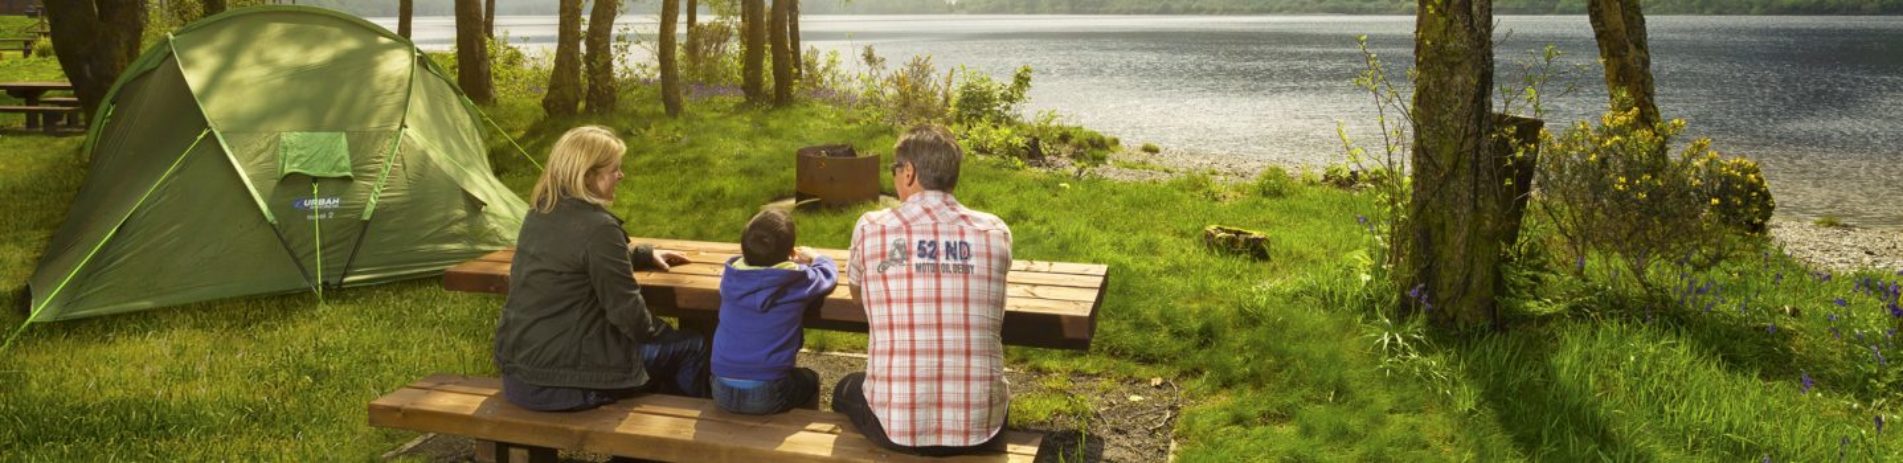 campsite-next-to-loch-family-sitting-at-picnic-bench